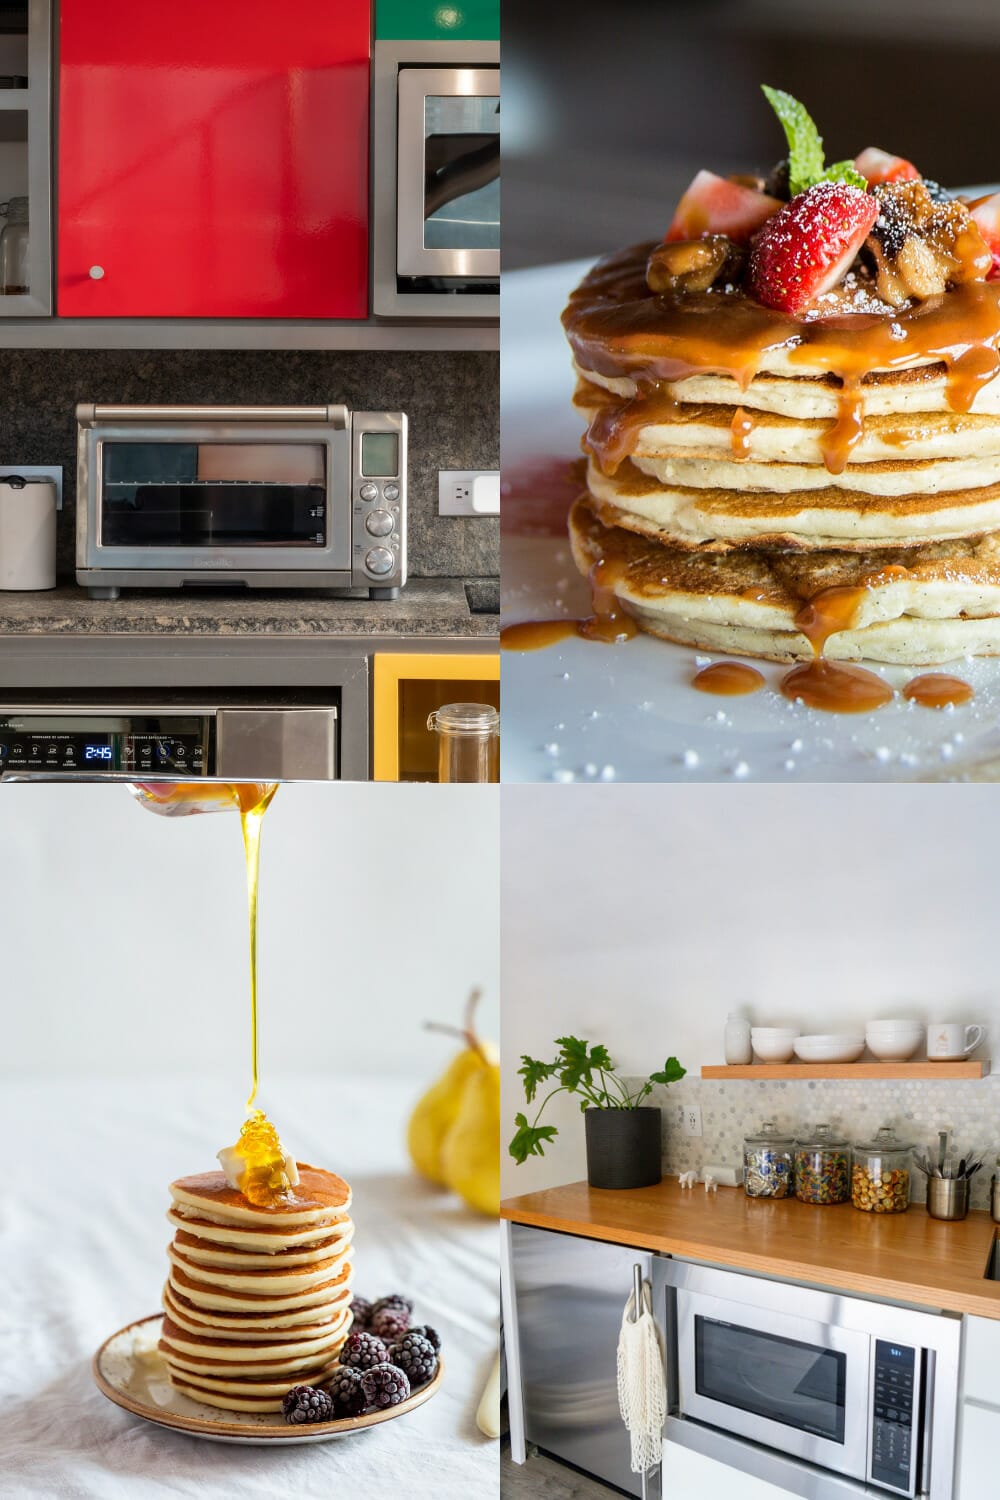 Can you make pancakes in the microwave? (and should you?) via @nofusskitchen